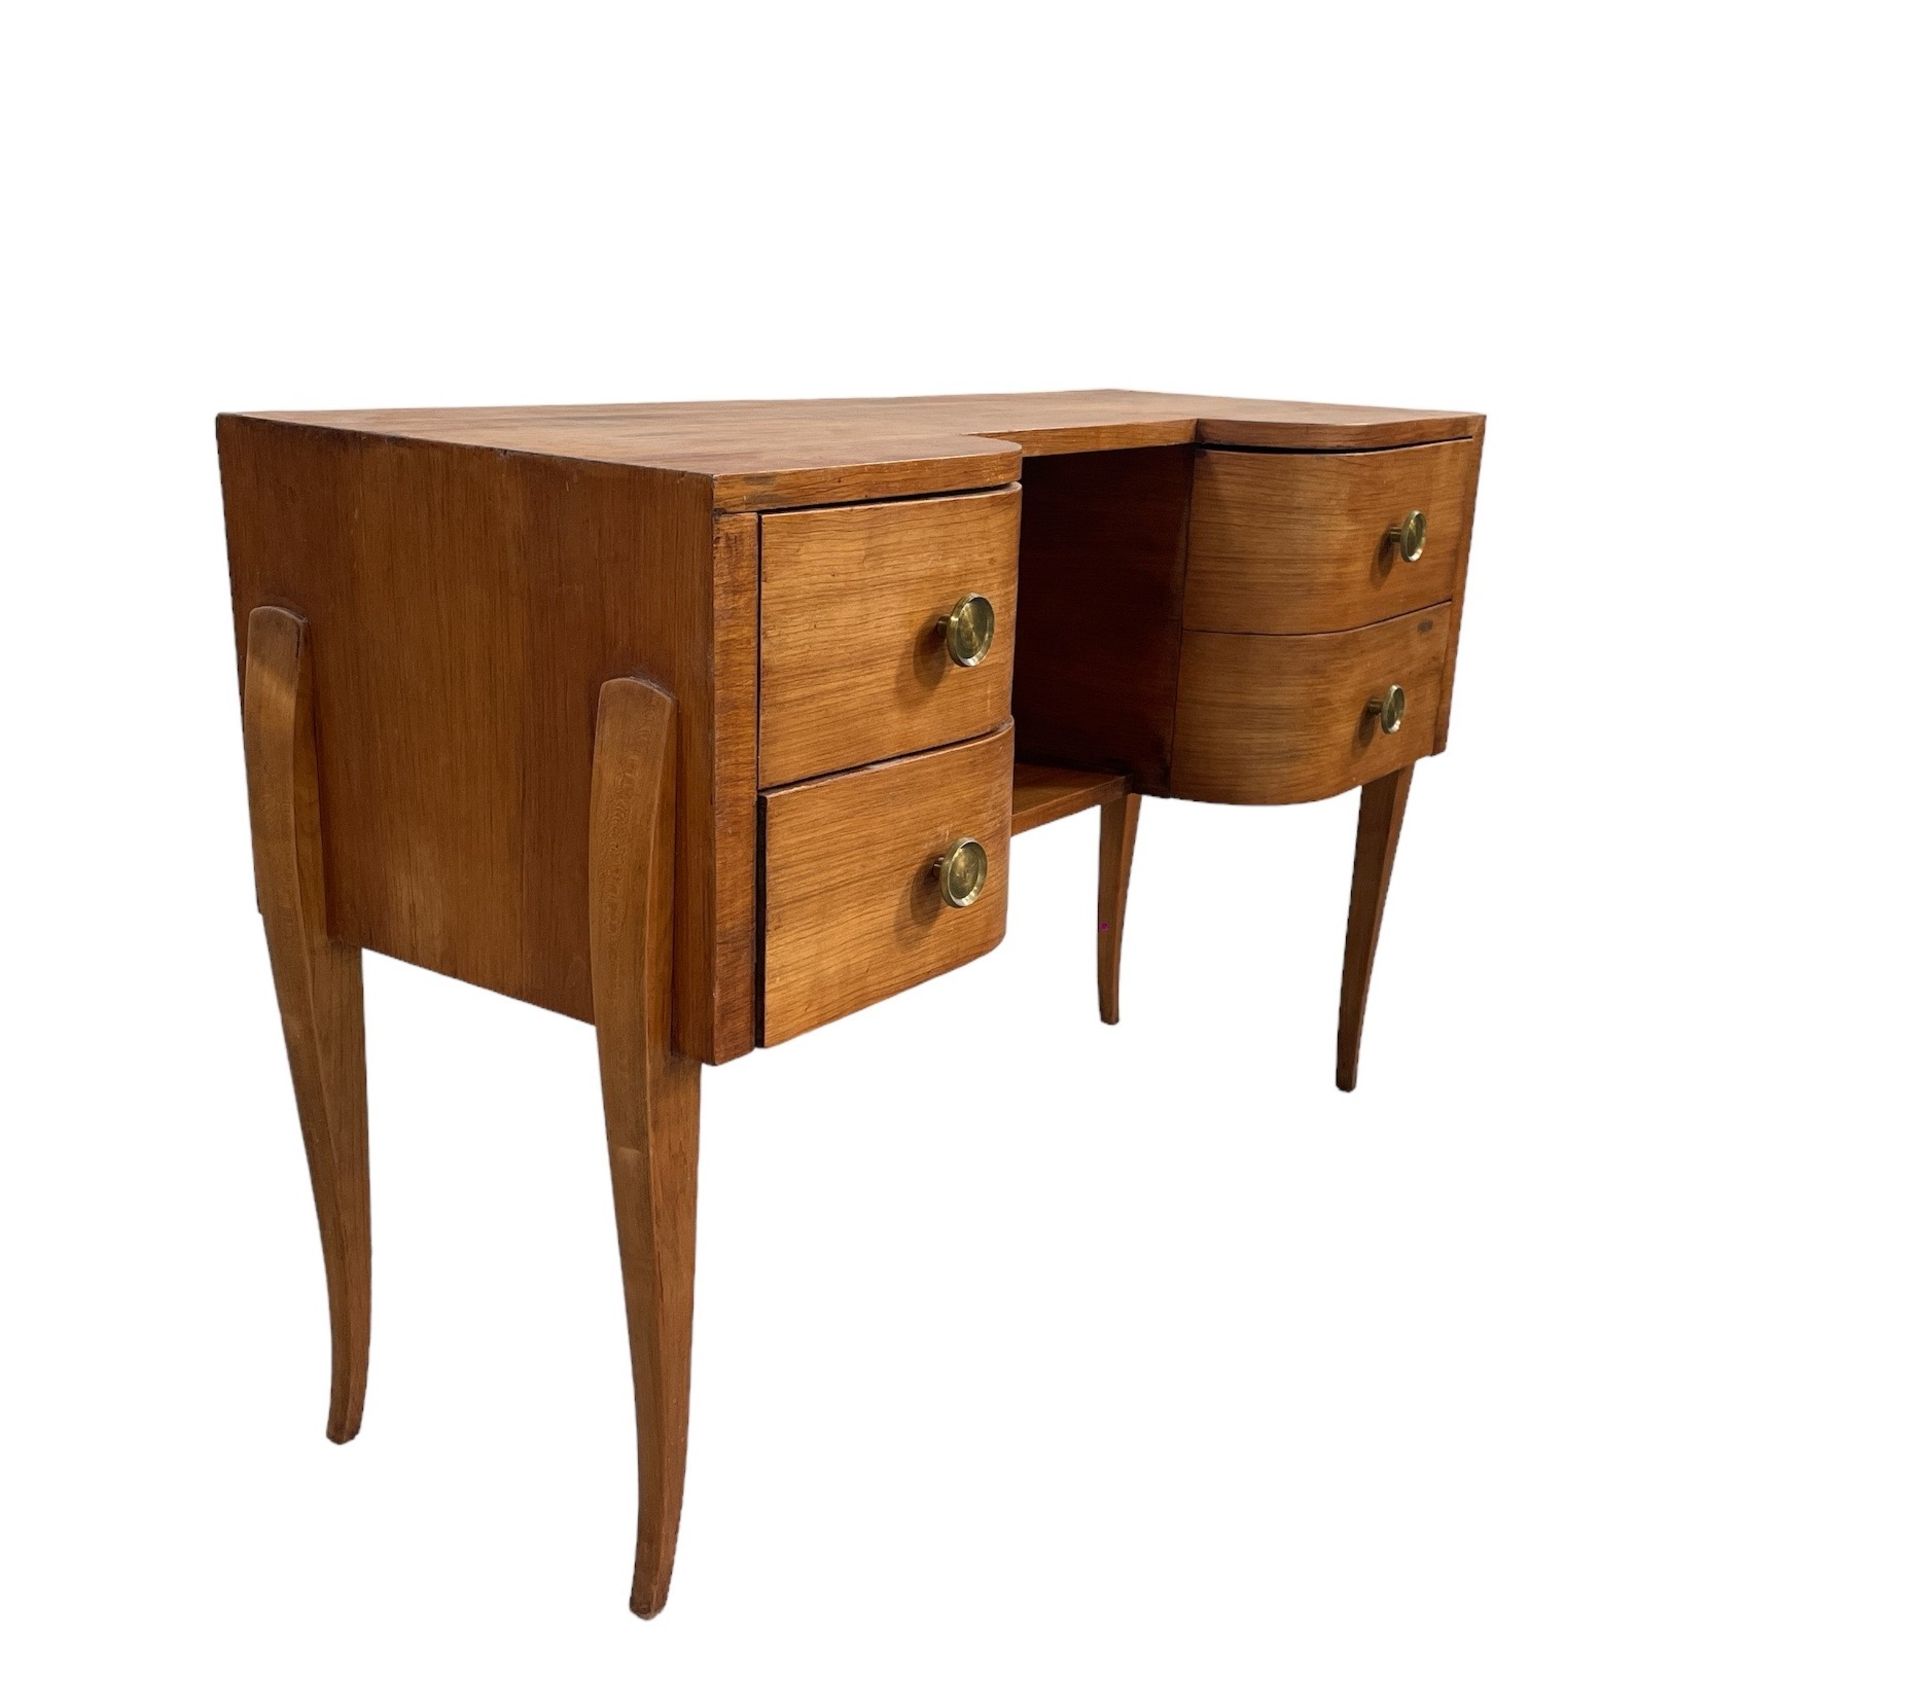 Wooden desk with 4 drawers French work circa 1930 - Art Deco - Image 2 of 2